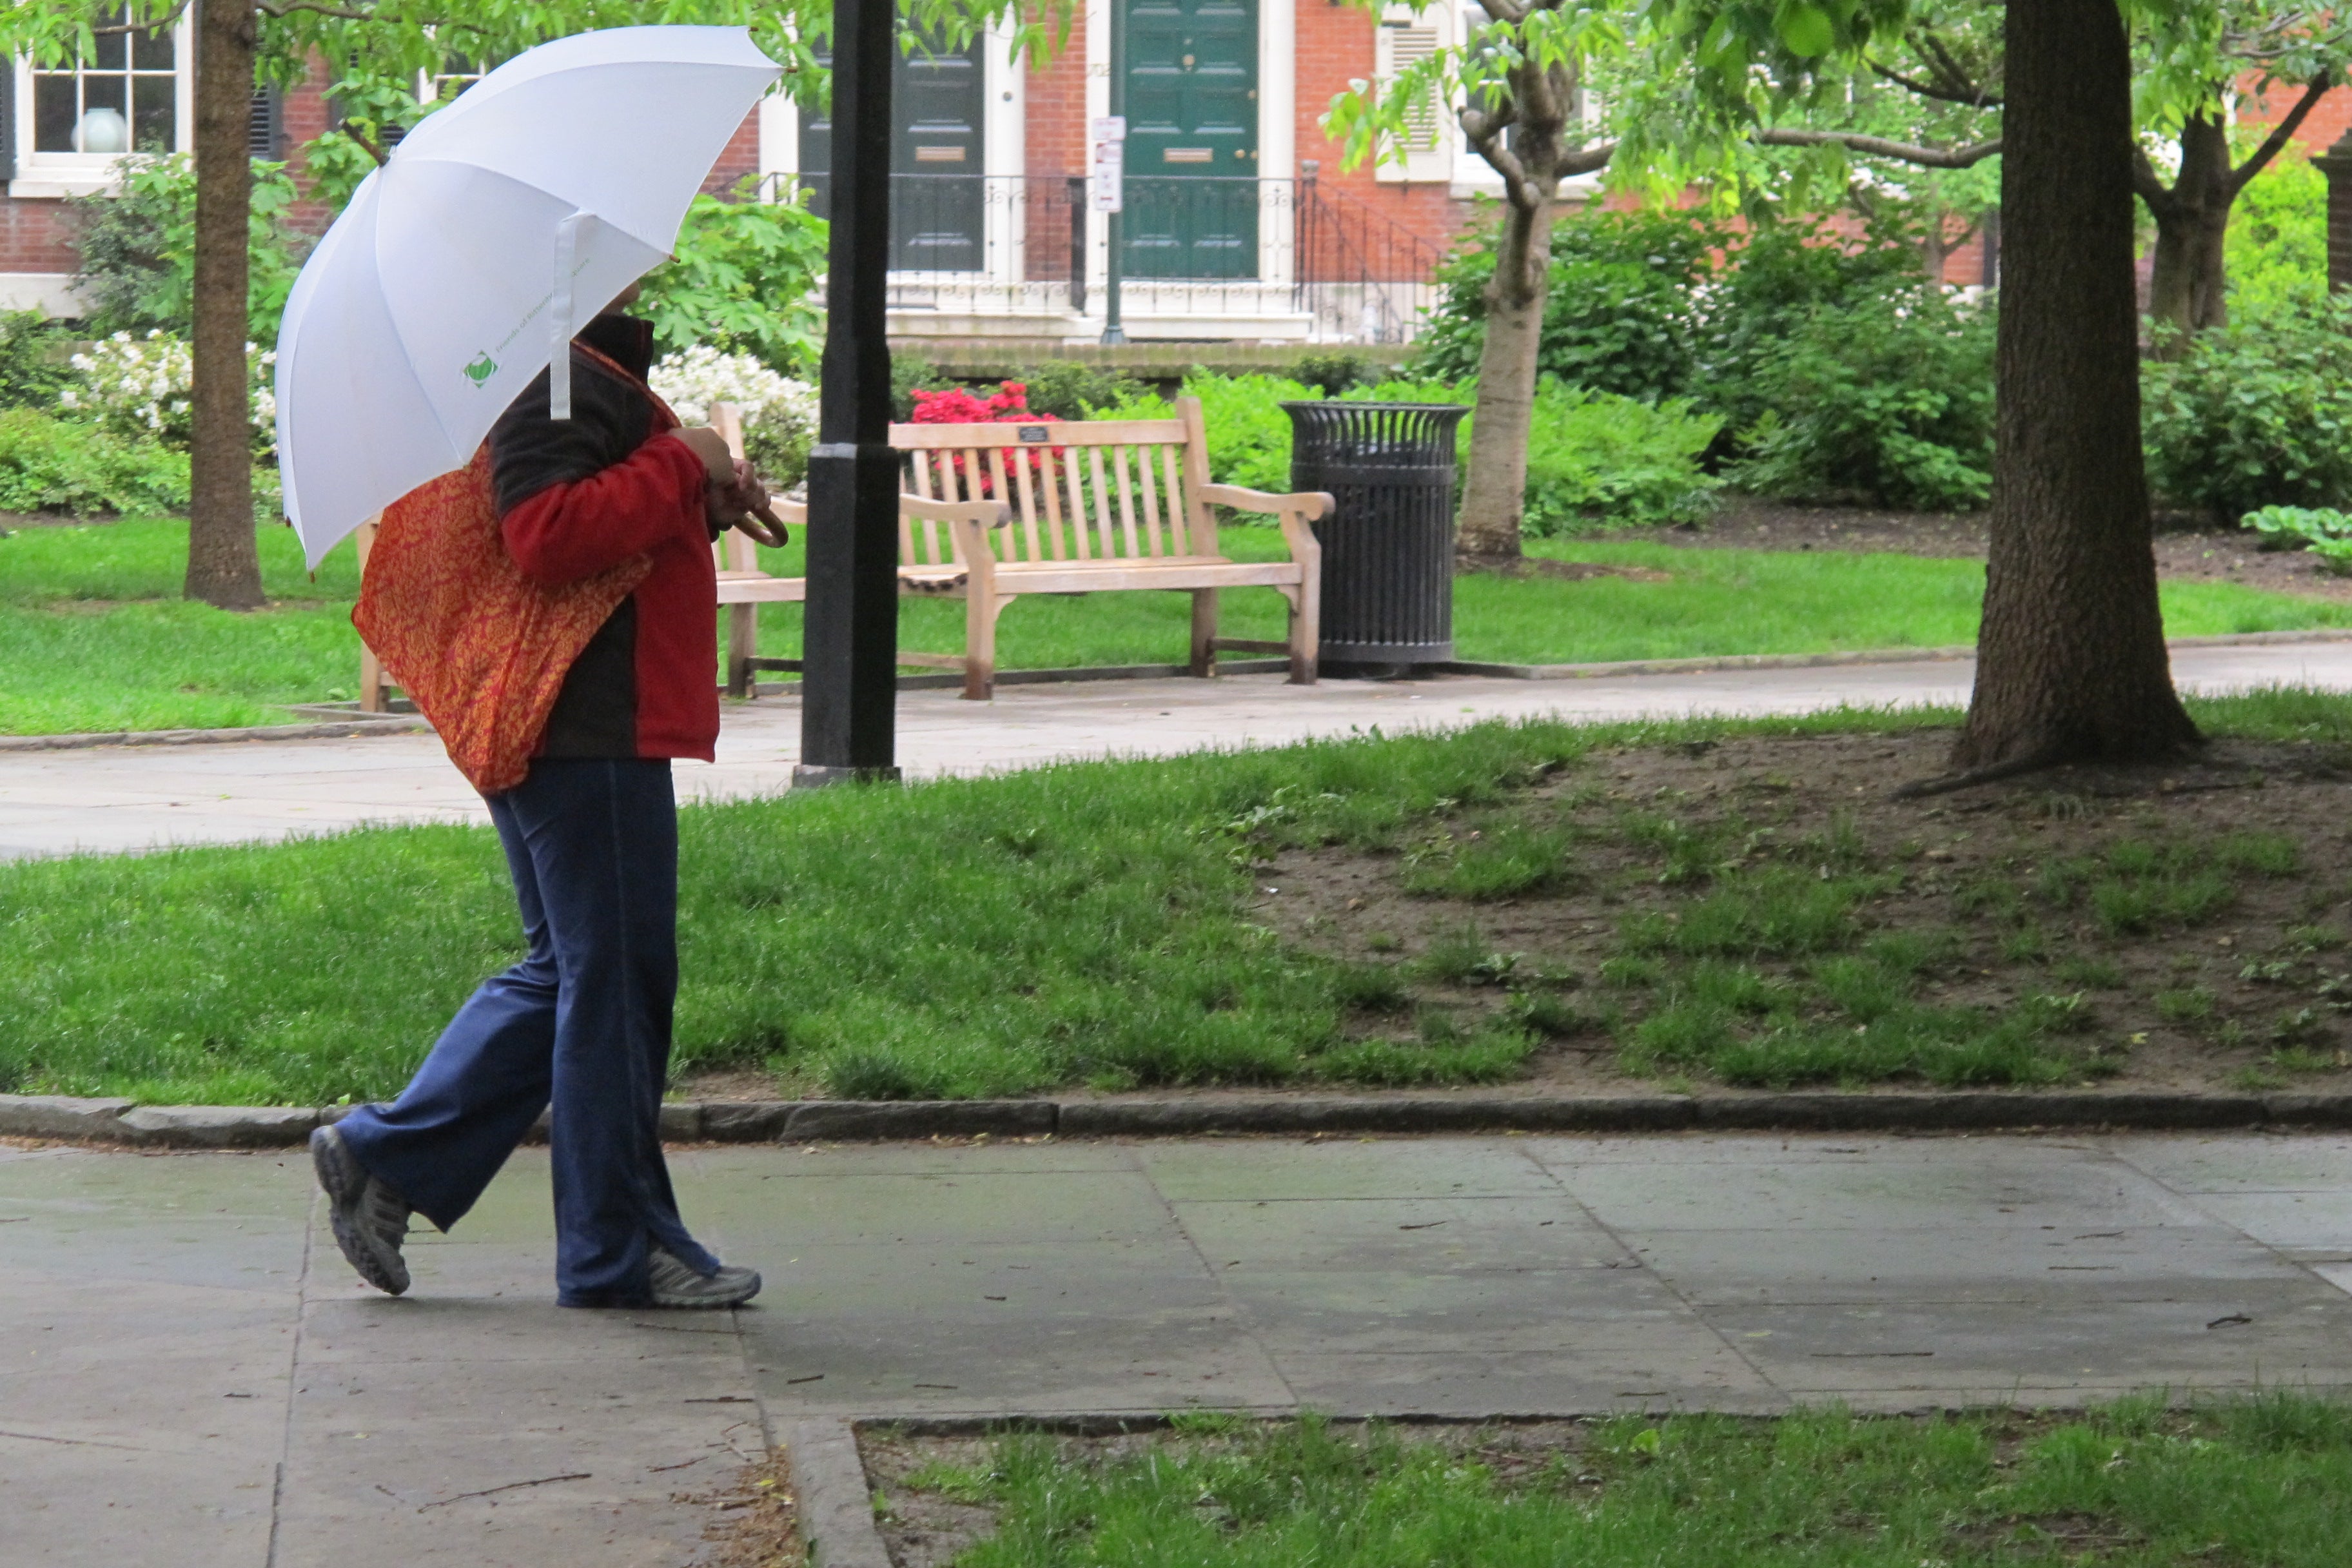 Don't forget the umbrella: There's an 80% chance of rain and thunderstorms today.